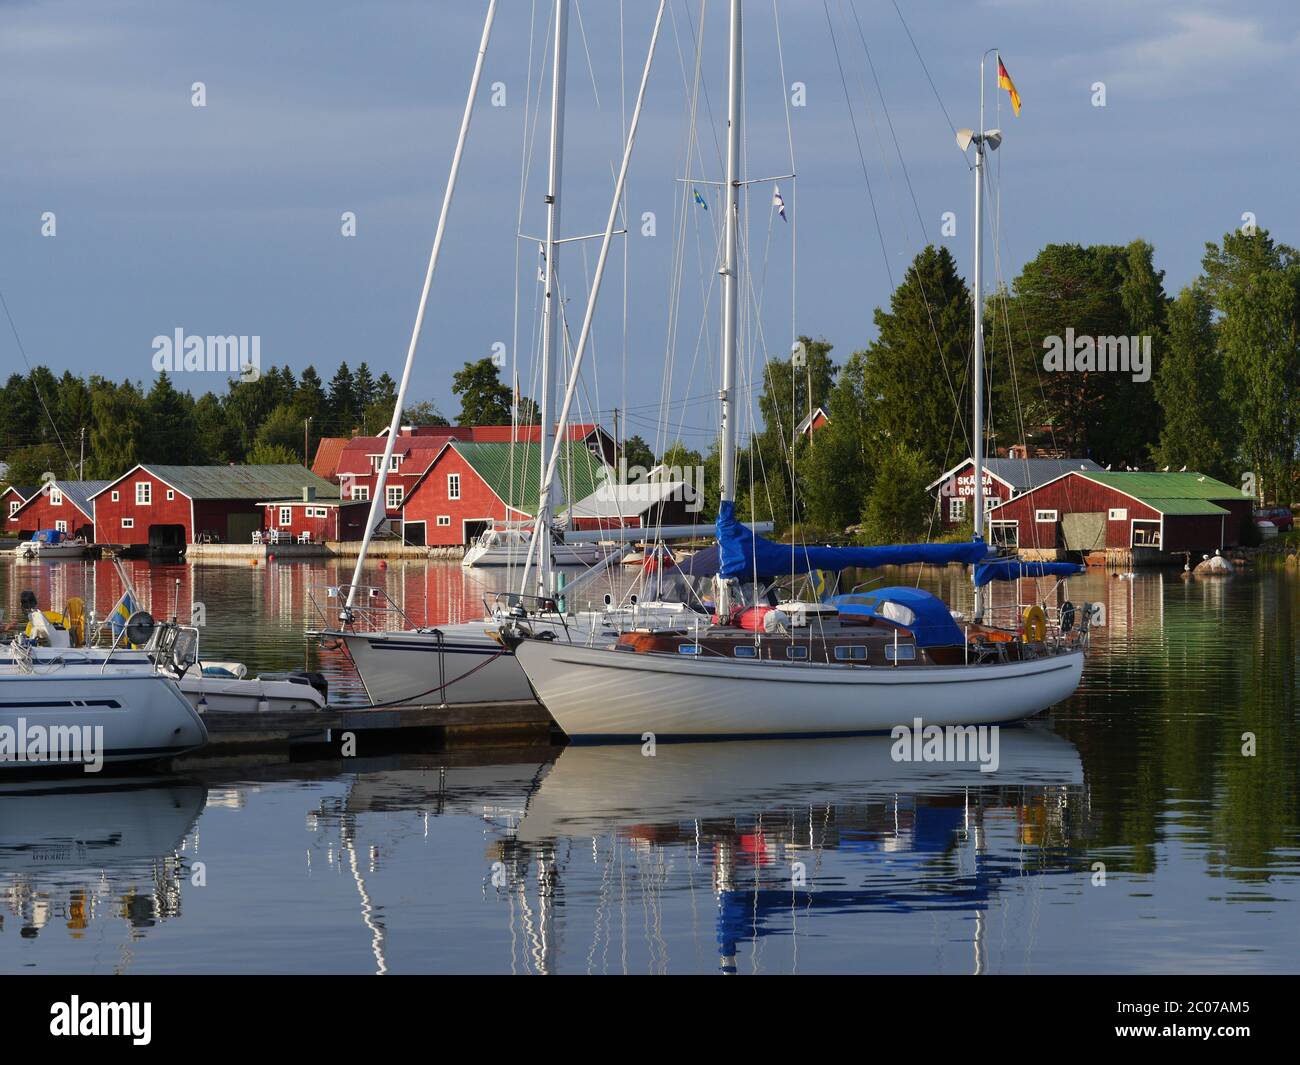 fishermen's village in sweden with sailing boat Stock Photo